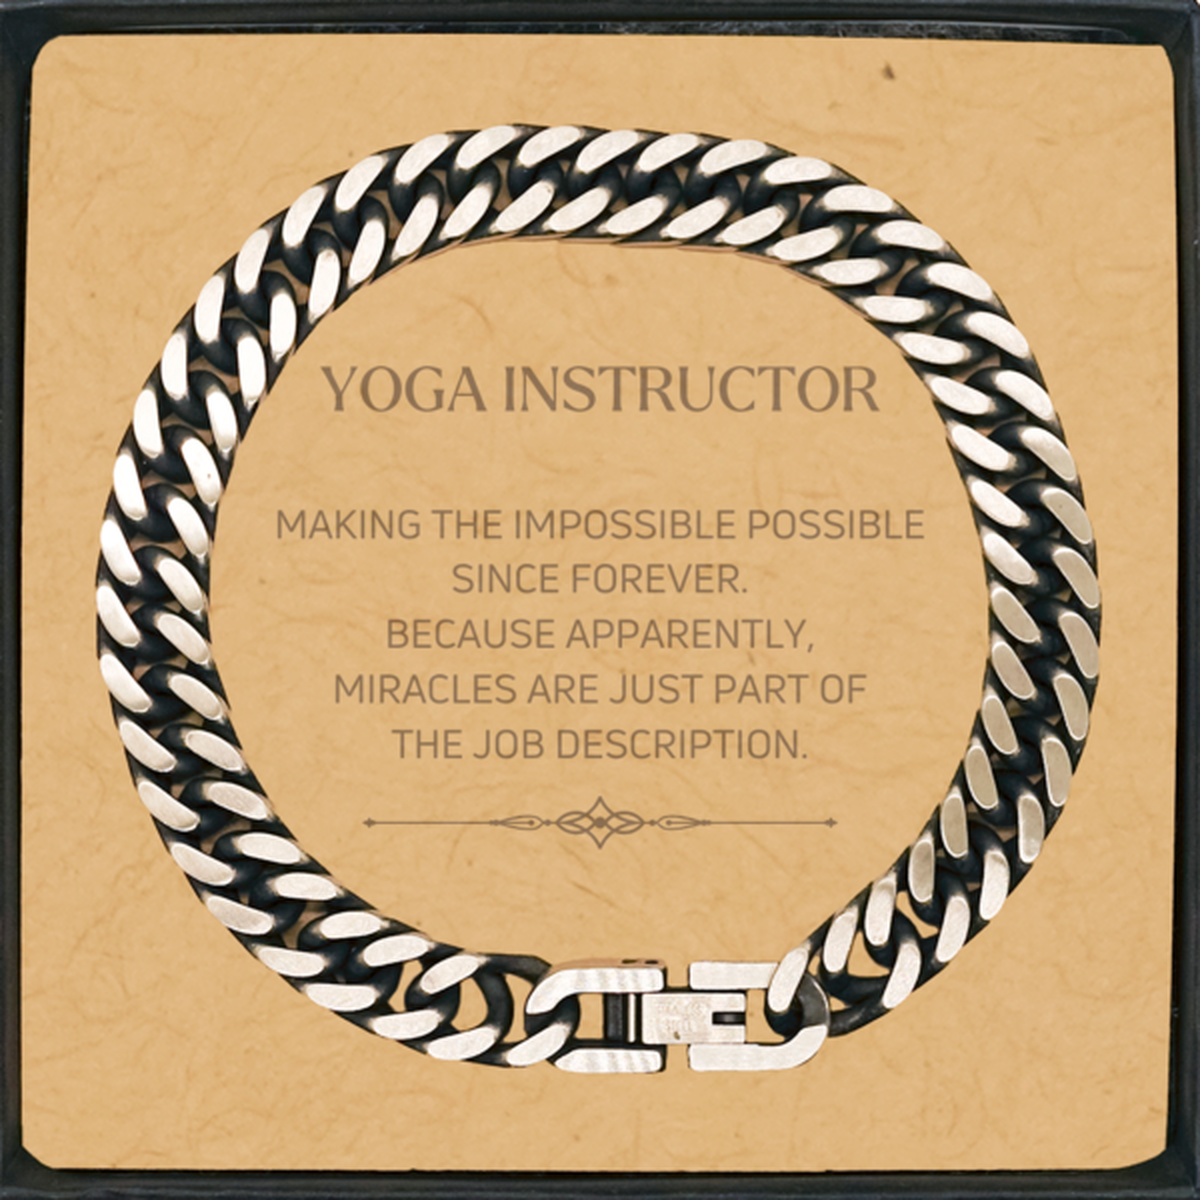 Funny Yoga Instructor Gifts, Miracles are just part of the job description, Inspirational Birthday Cuban Link Chain Bracelet For Yoga Instructor, Men, Women, Coworkers, Friends, Boss